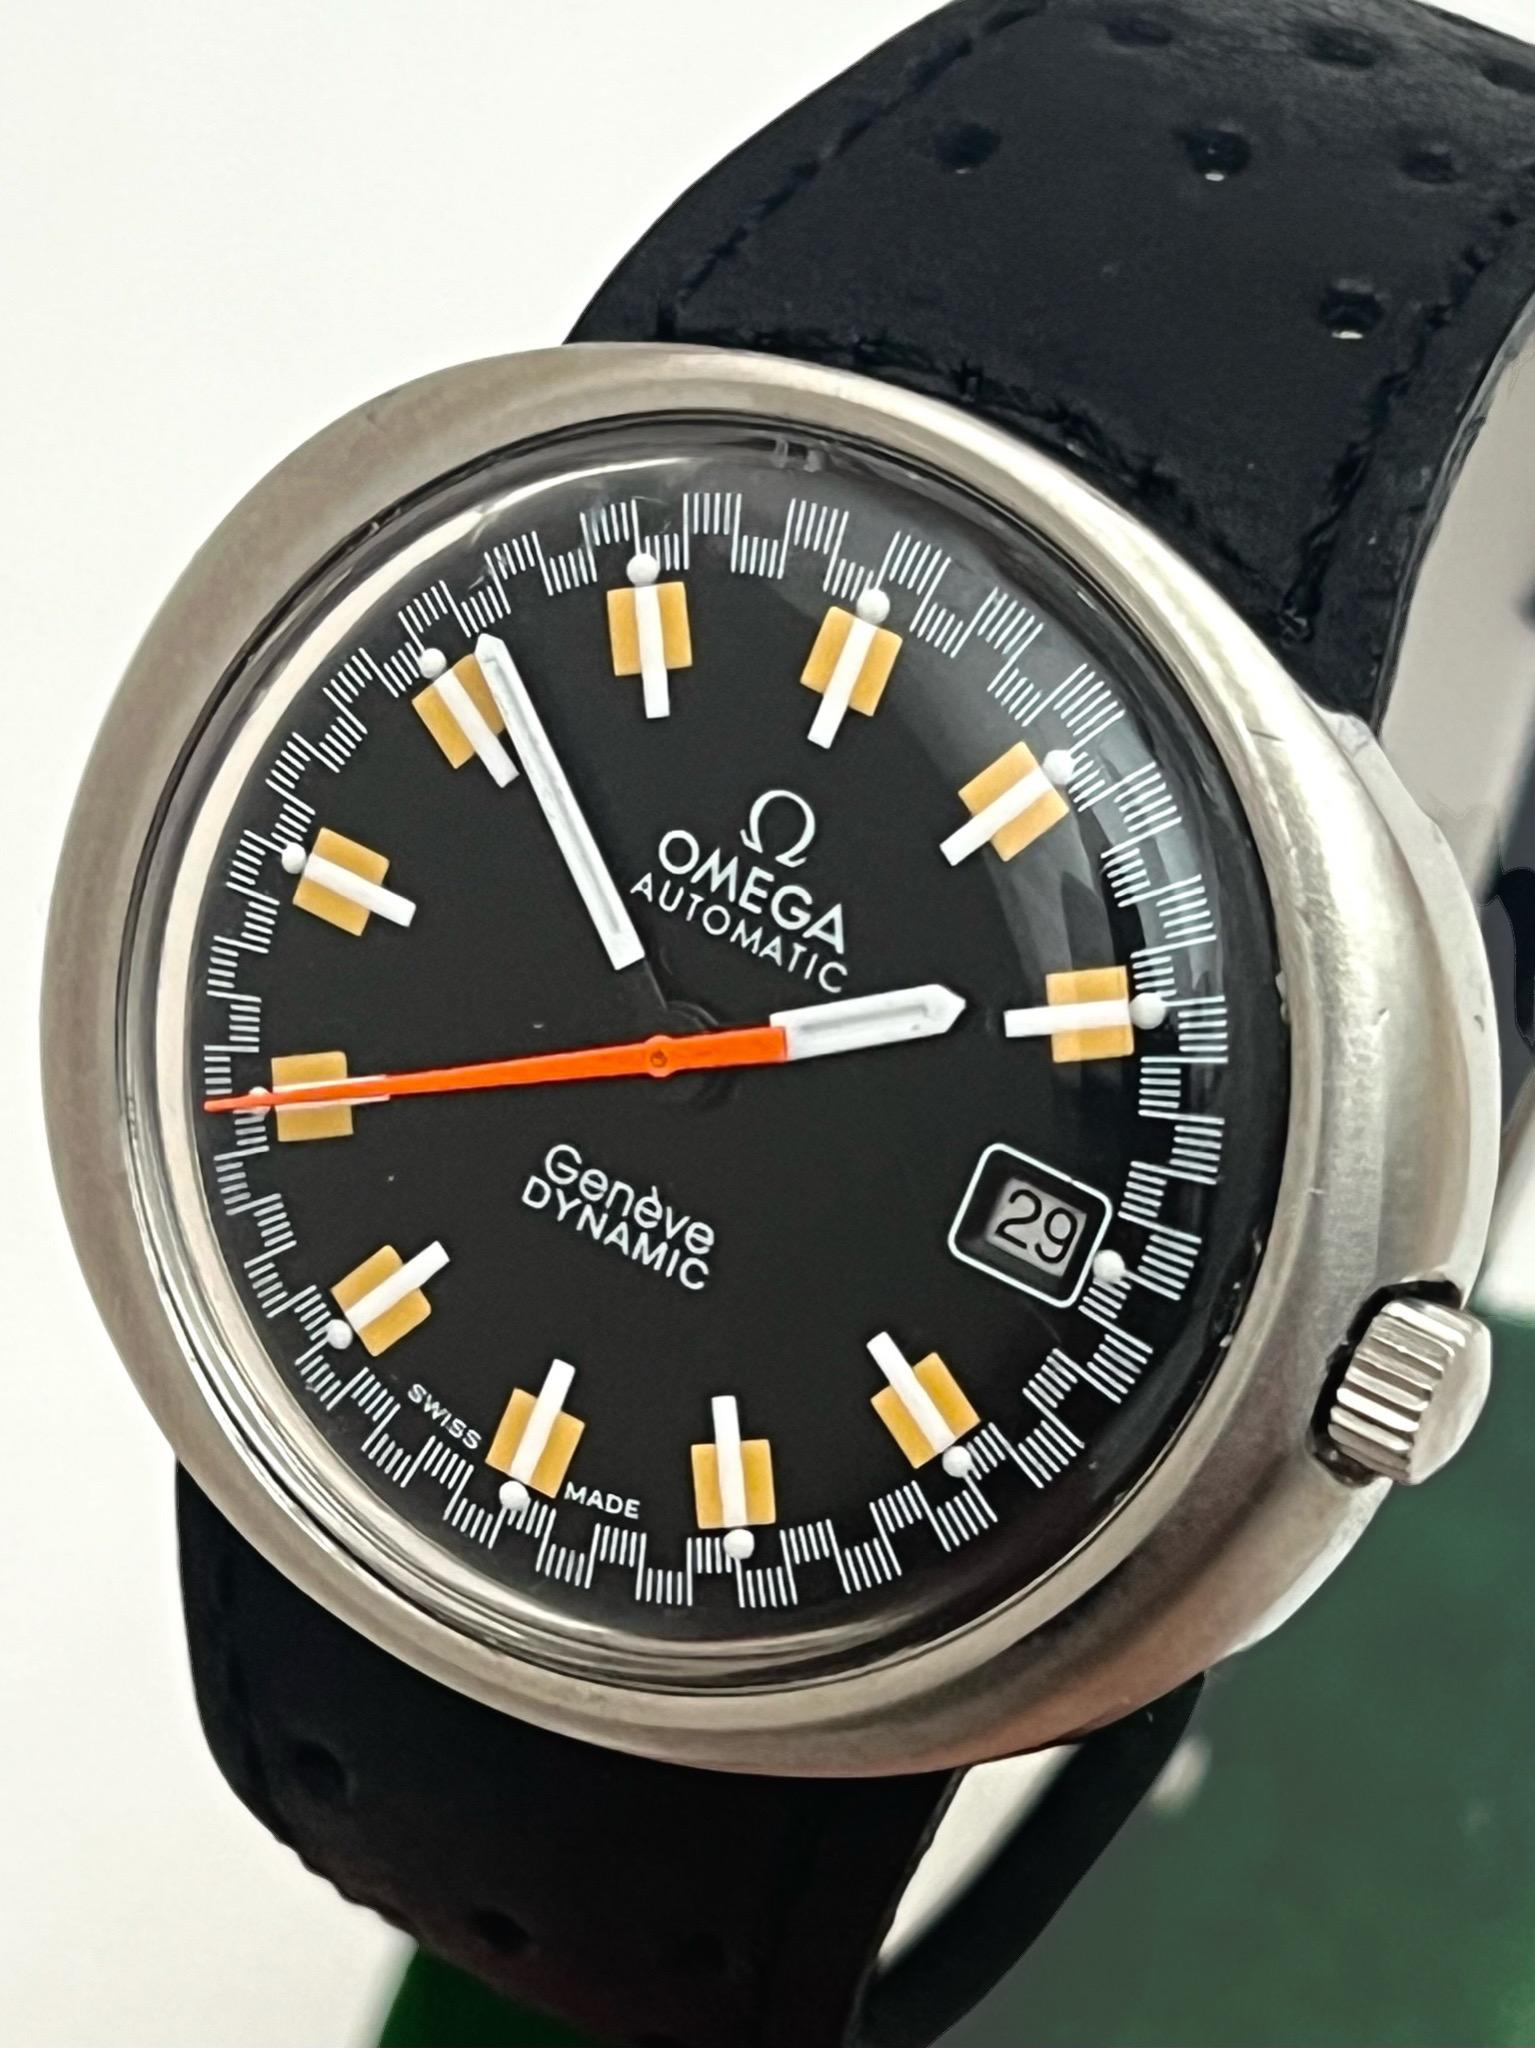 A very stylish vintage Omega Automatic Genève Dynamic wristwatch, Model Ref 166.039. Omega introduced the Ref. 166.039 Genève Dynamic in 1969 and this model is circa 1970.

The watch is made of steel oval brushed monocoque case with original Omega